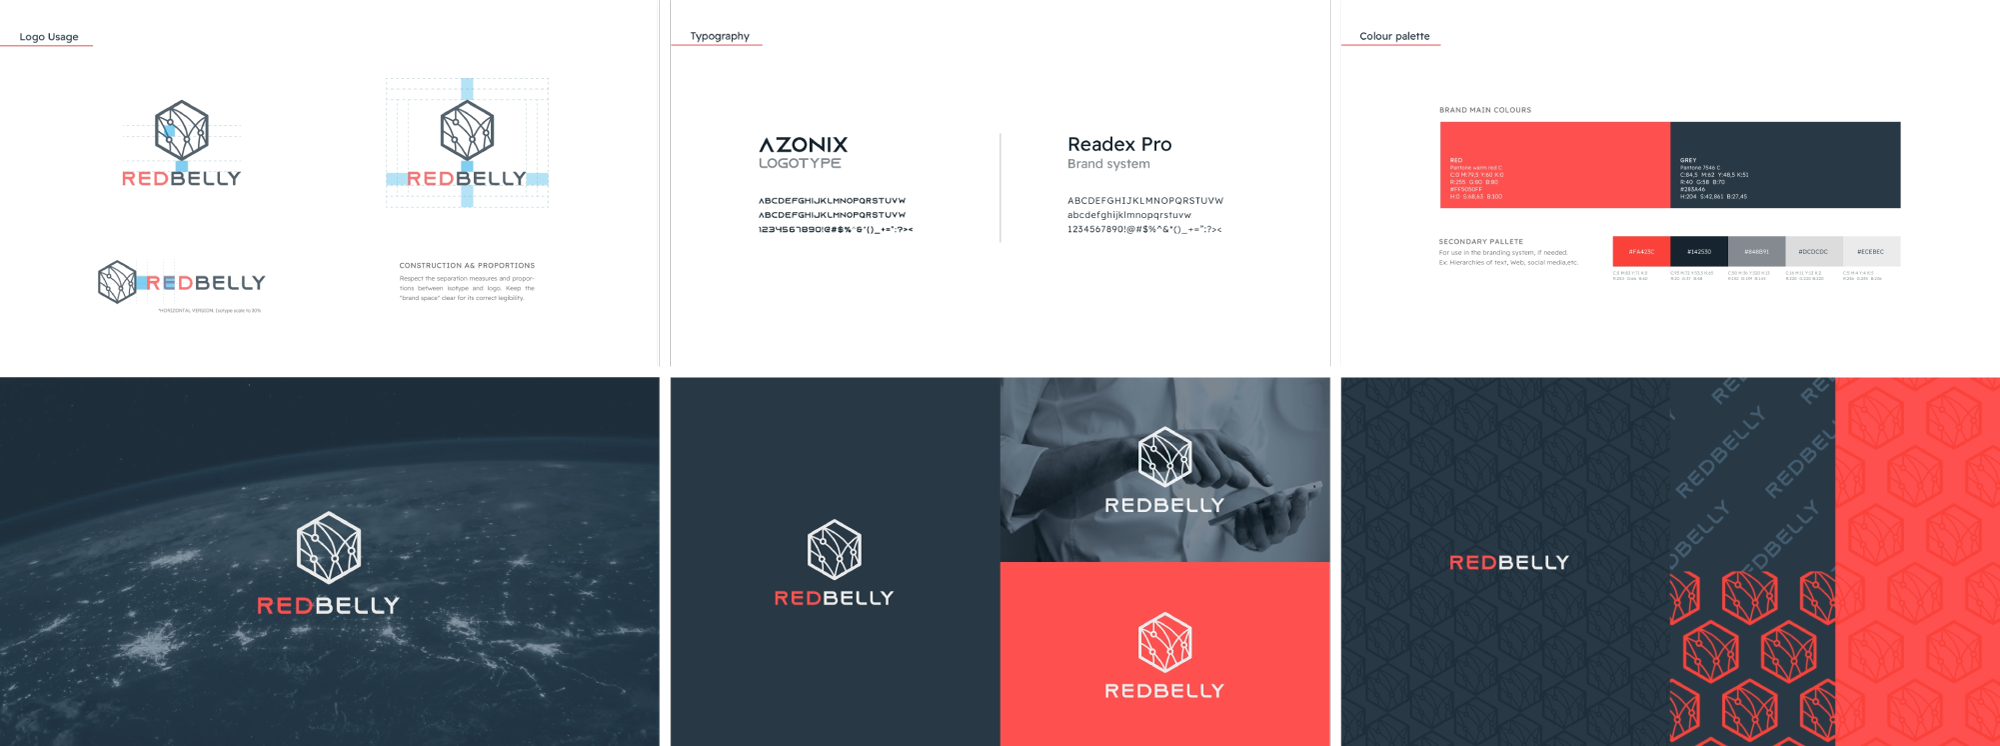 Pages from the Redbelly brand style guide